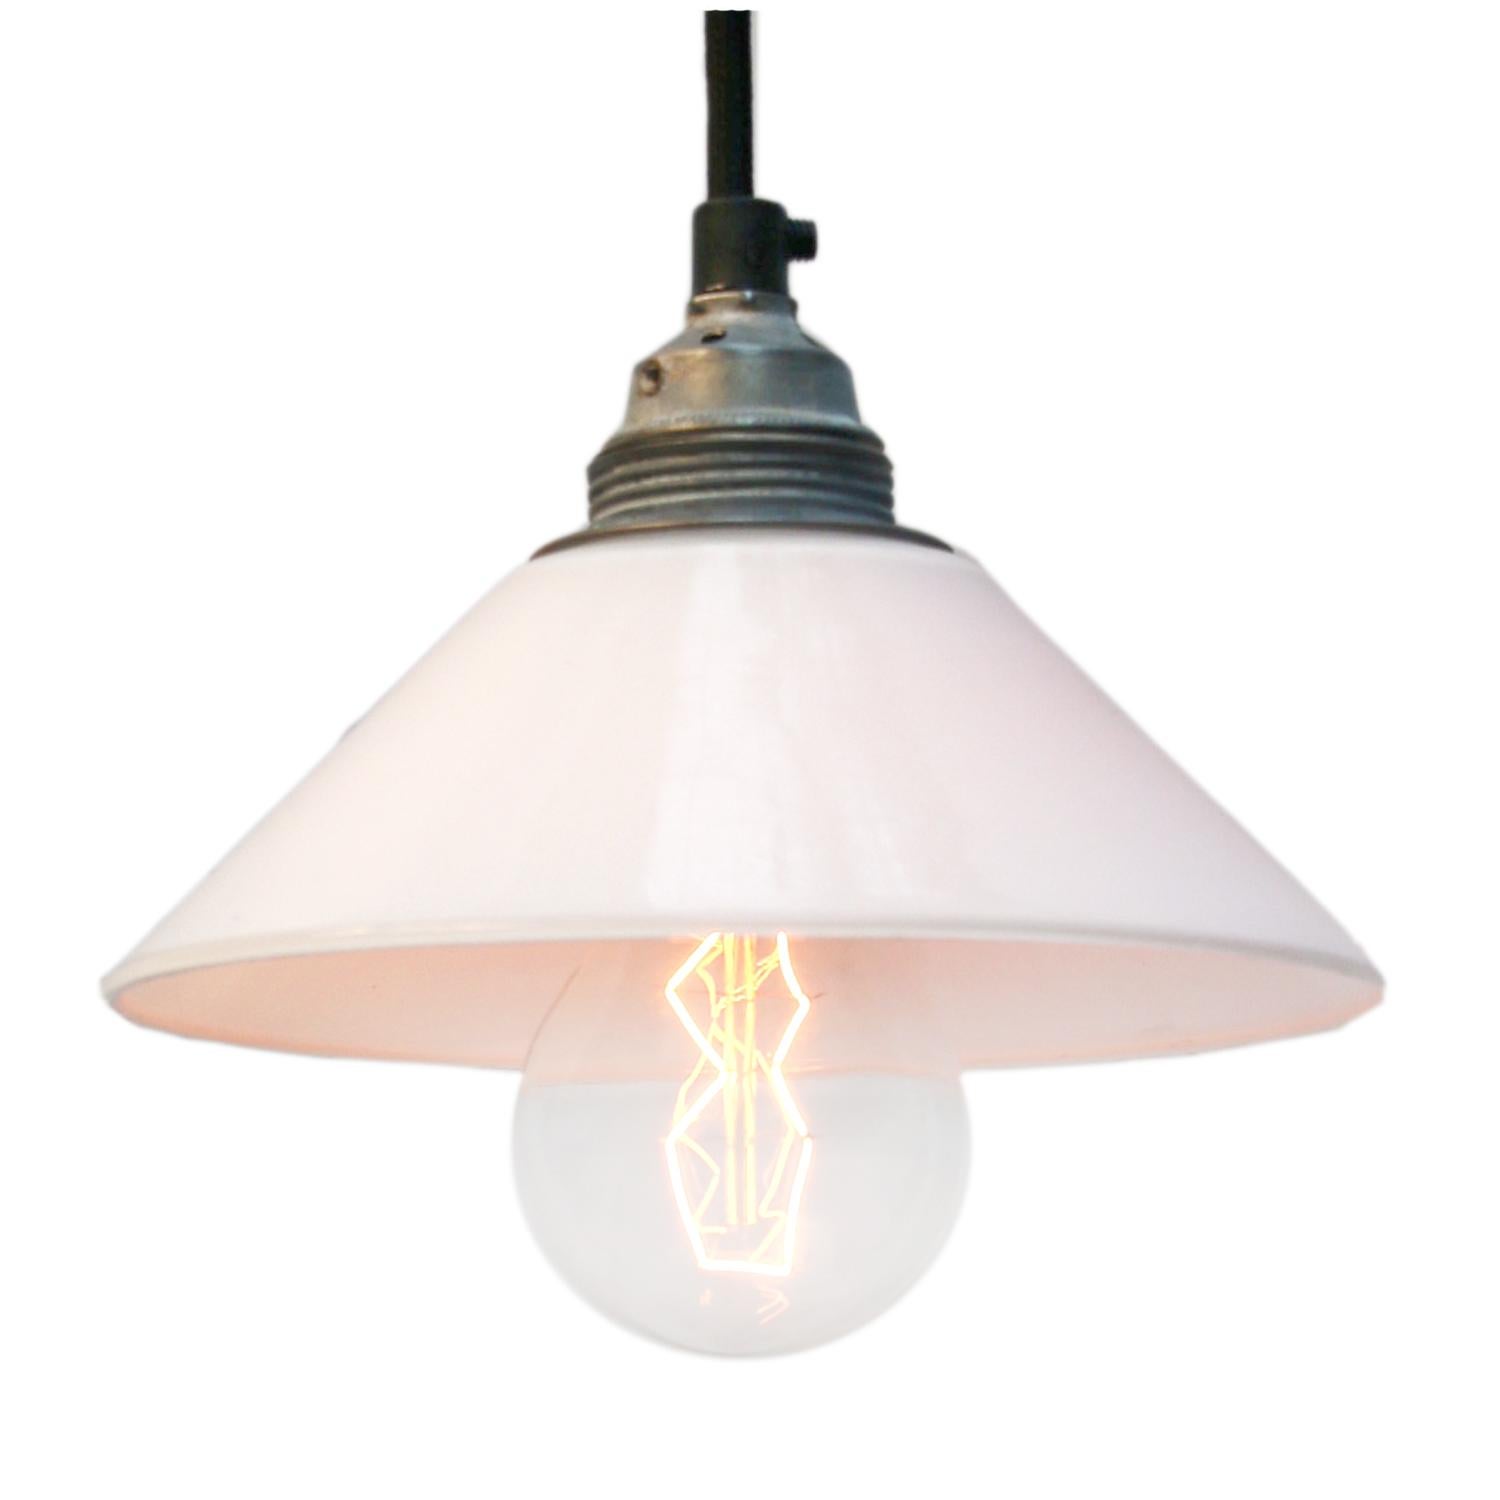 French opaline glass industrial pendant.
2 meter black wire

Weight 0.40 kg / 0.9 lb

Priced per individual item. All lamps have been made suitable by international standards for incandescent light bulbs, energy-efficient and LED bulbs. E26/E27